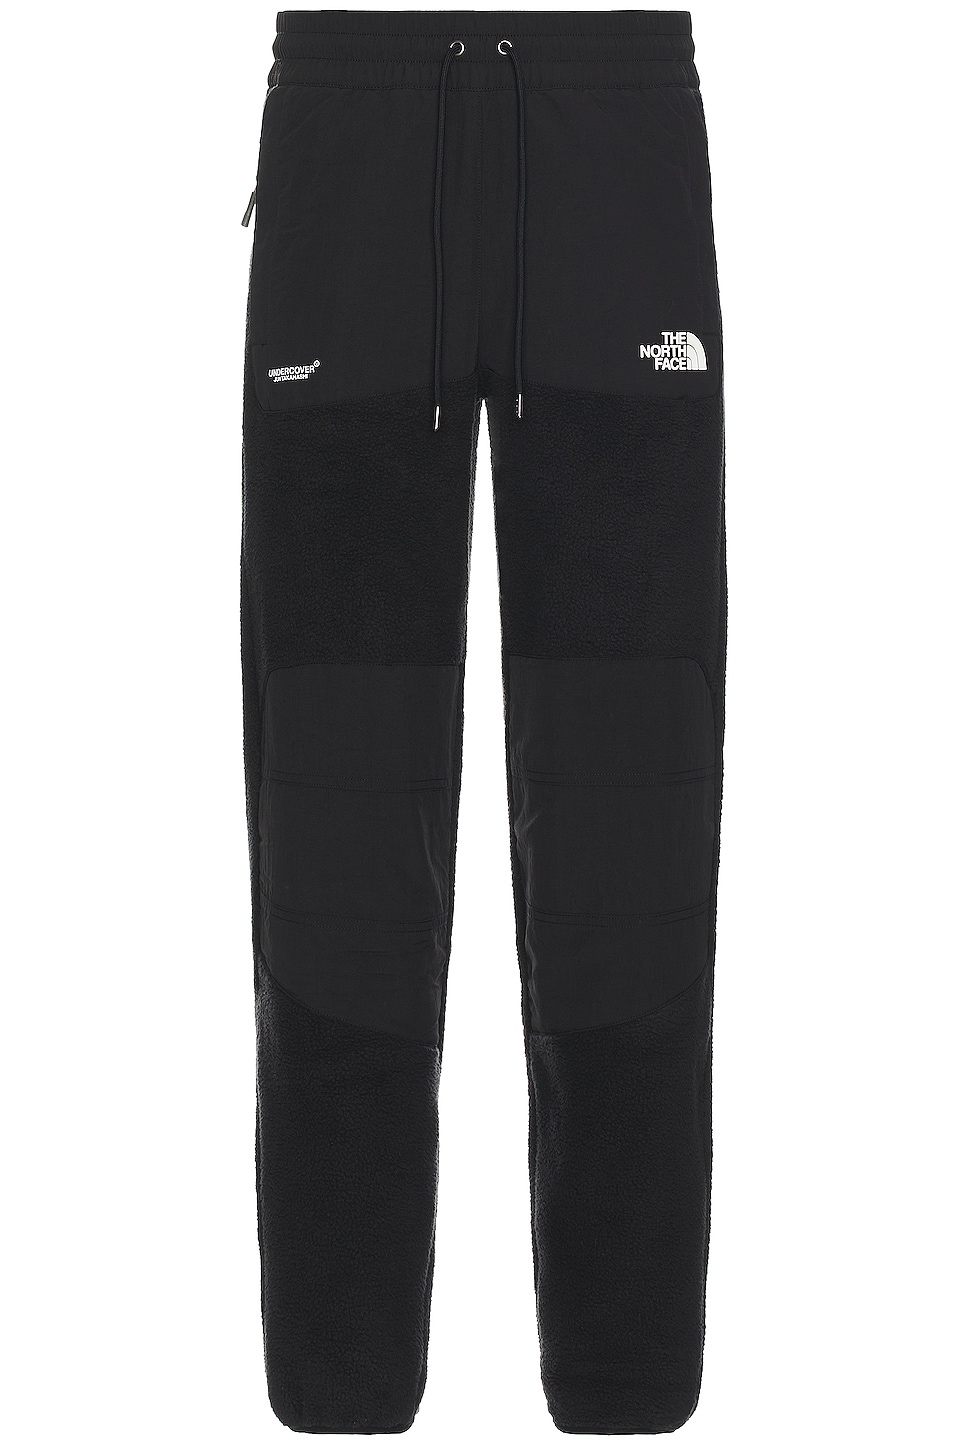 Image 1 of The North Face X Project U Fleece Pants in Tnf Black